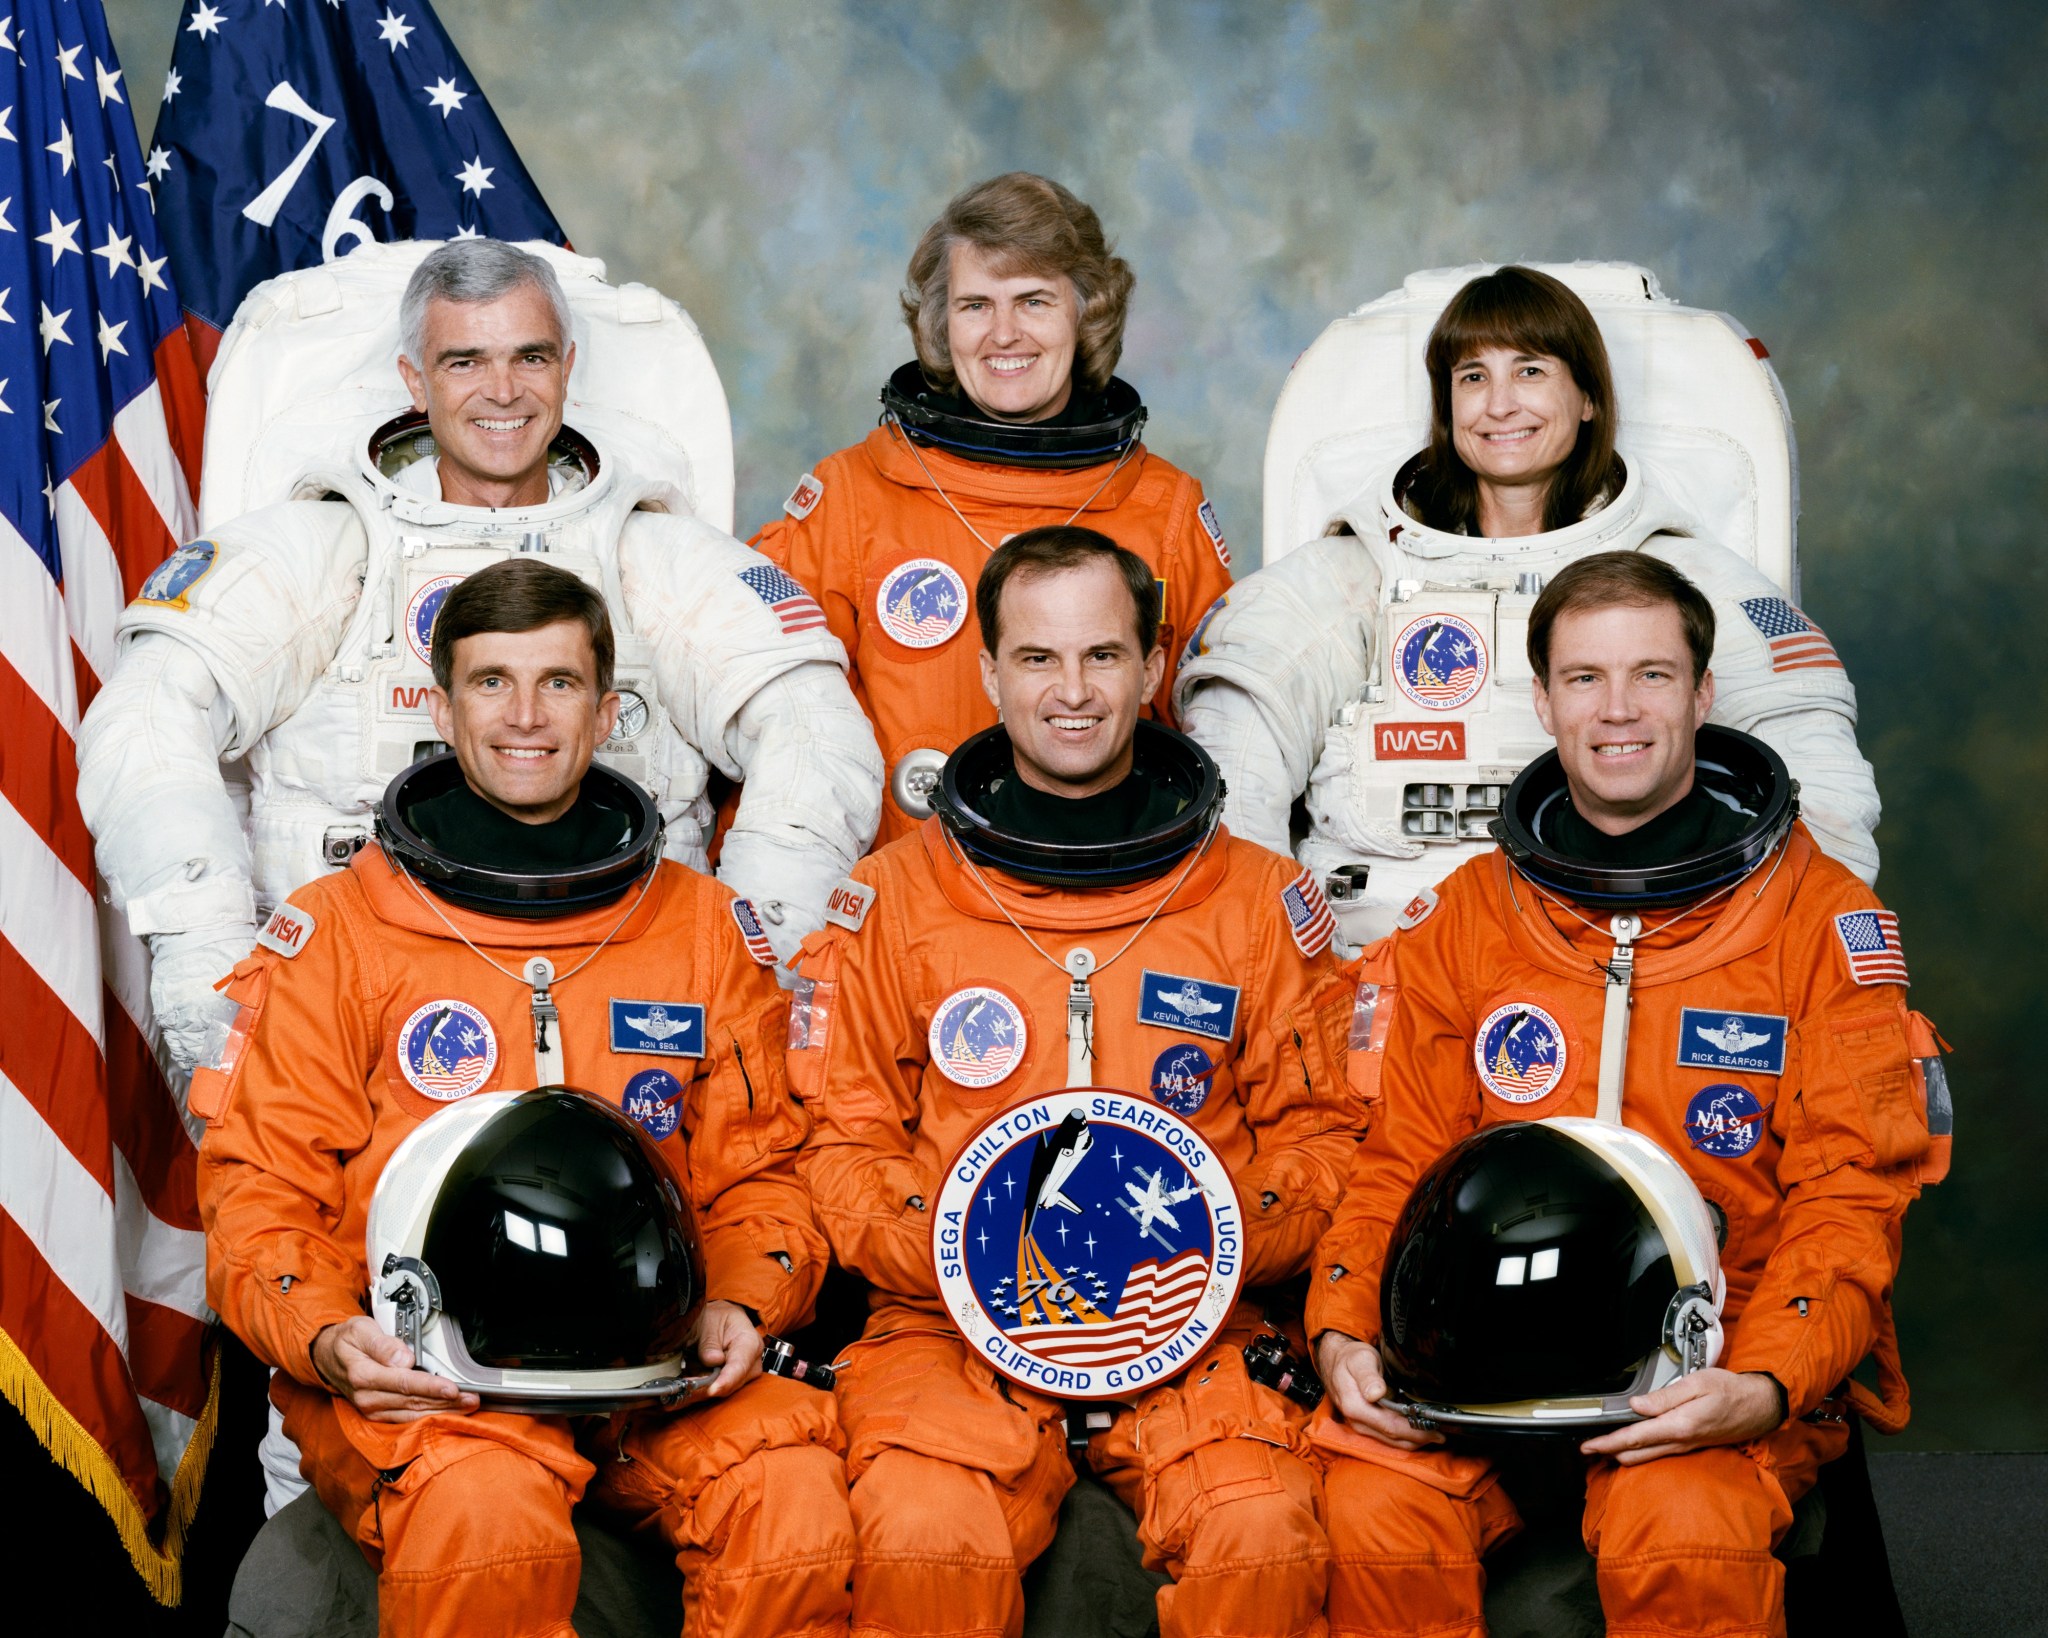 STS-76 crew wearing orange launch and entry suits and extravehicular mobility unit (EMU) suits. The American flag and Spirit of 76 flag are in the background.